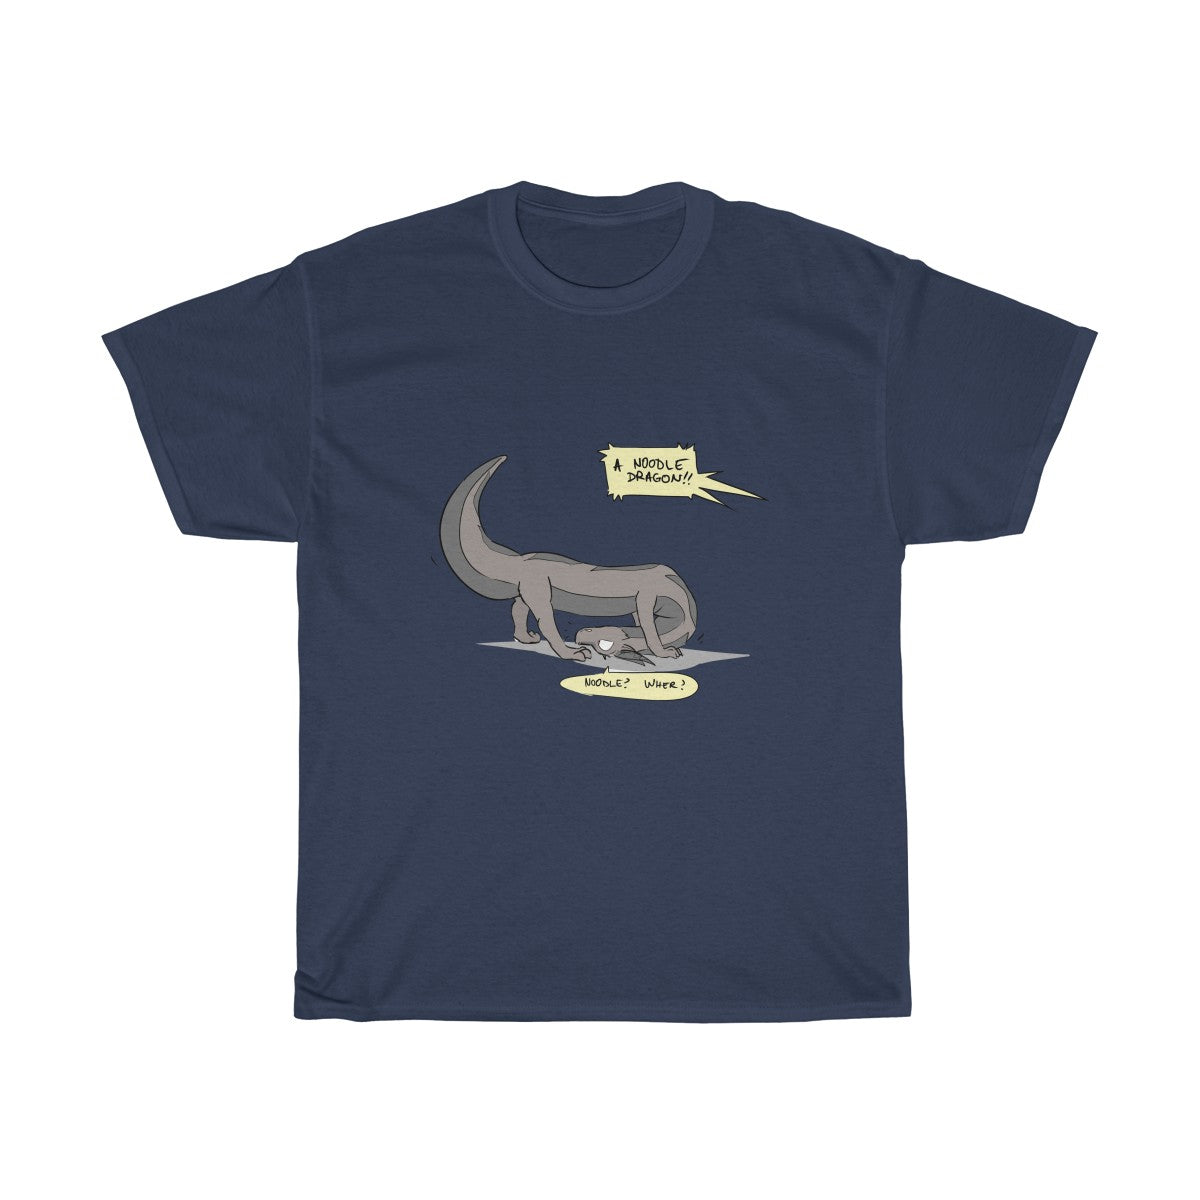 Confused Noodle Dragon - T-Shirt T-Shirt Zenonclaw Navy Blue S 